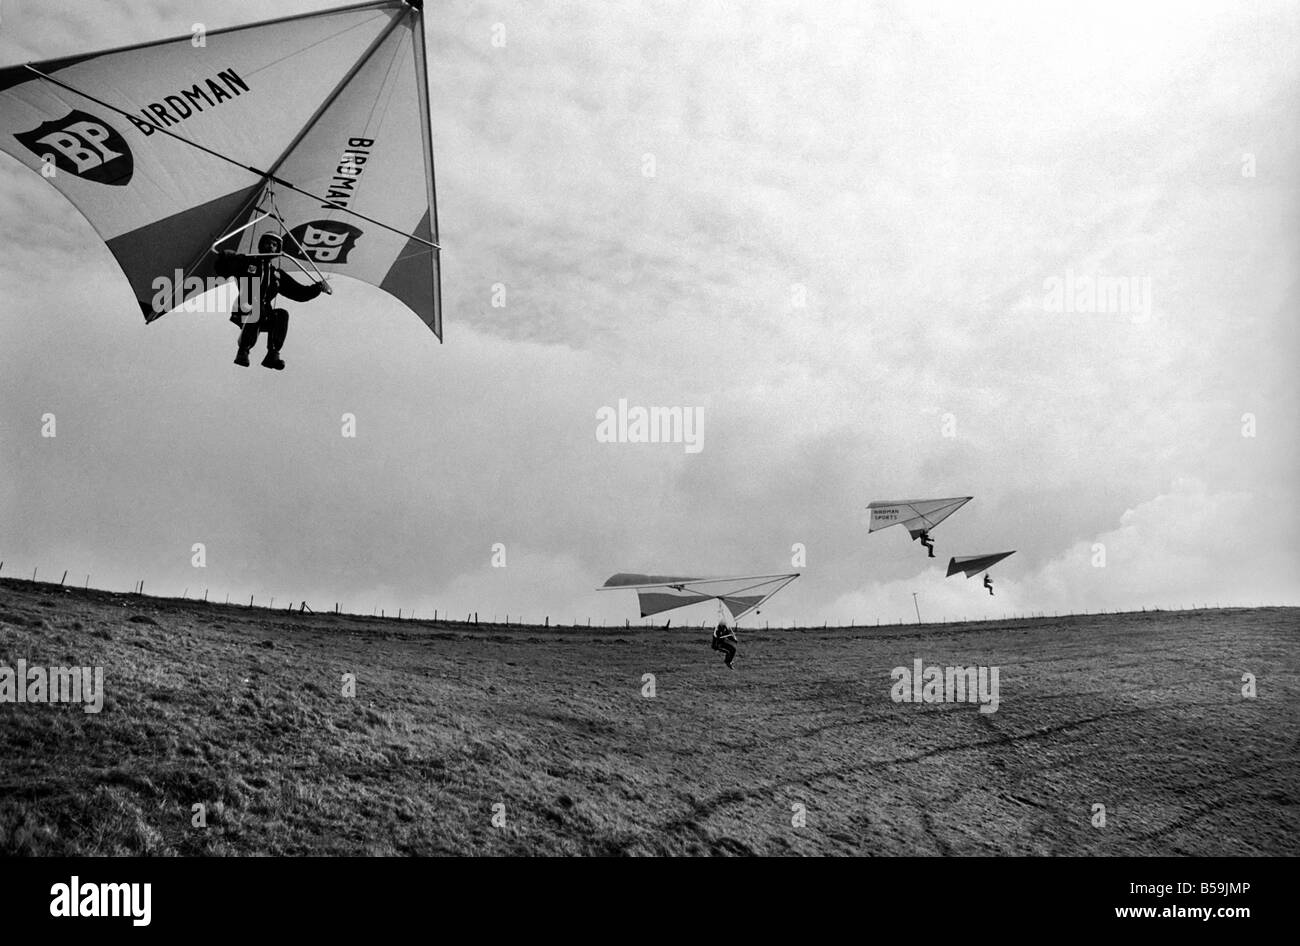 British Kite Team. With the World Hang Gliding Championships taking place in Australia next week, British Team sponsored by B.P. were having last minute get-together this afternoon (Friday) at Marlborough Downs, Wiltshire. March 1975 75-01306 Stock Photo